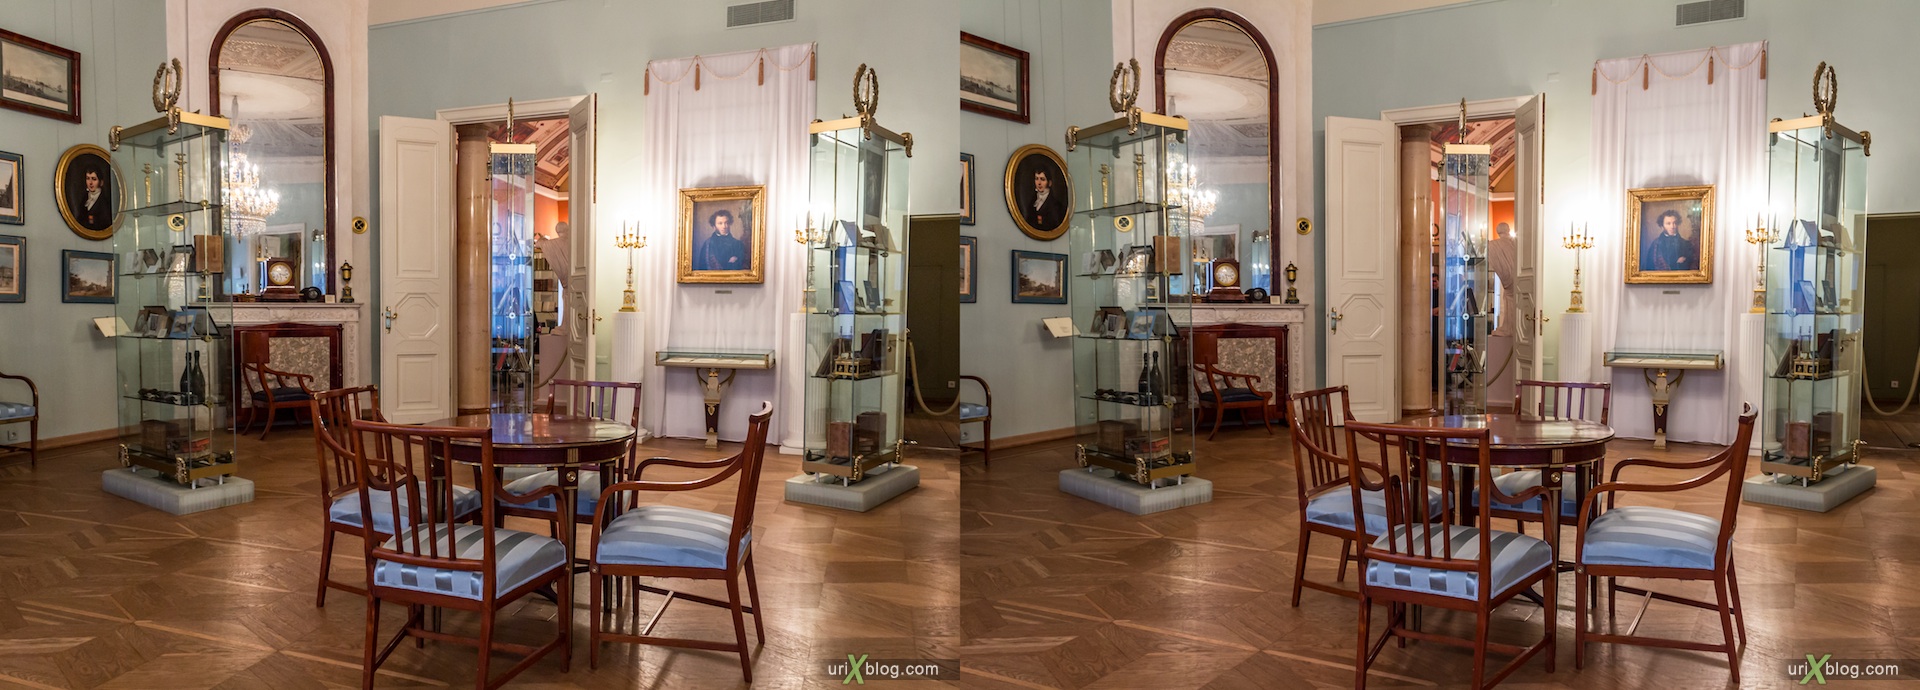 2013, Pushkin museum, estate of Khrushchev-Seleznyov, Moscow, Russia, 3D, stereo pair, cross-eyed, crossview, cross view stereo pair